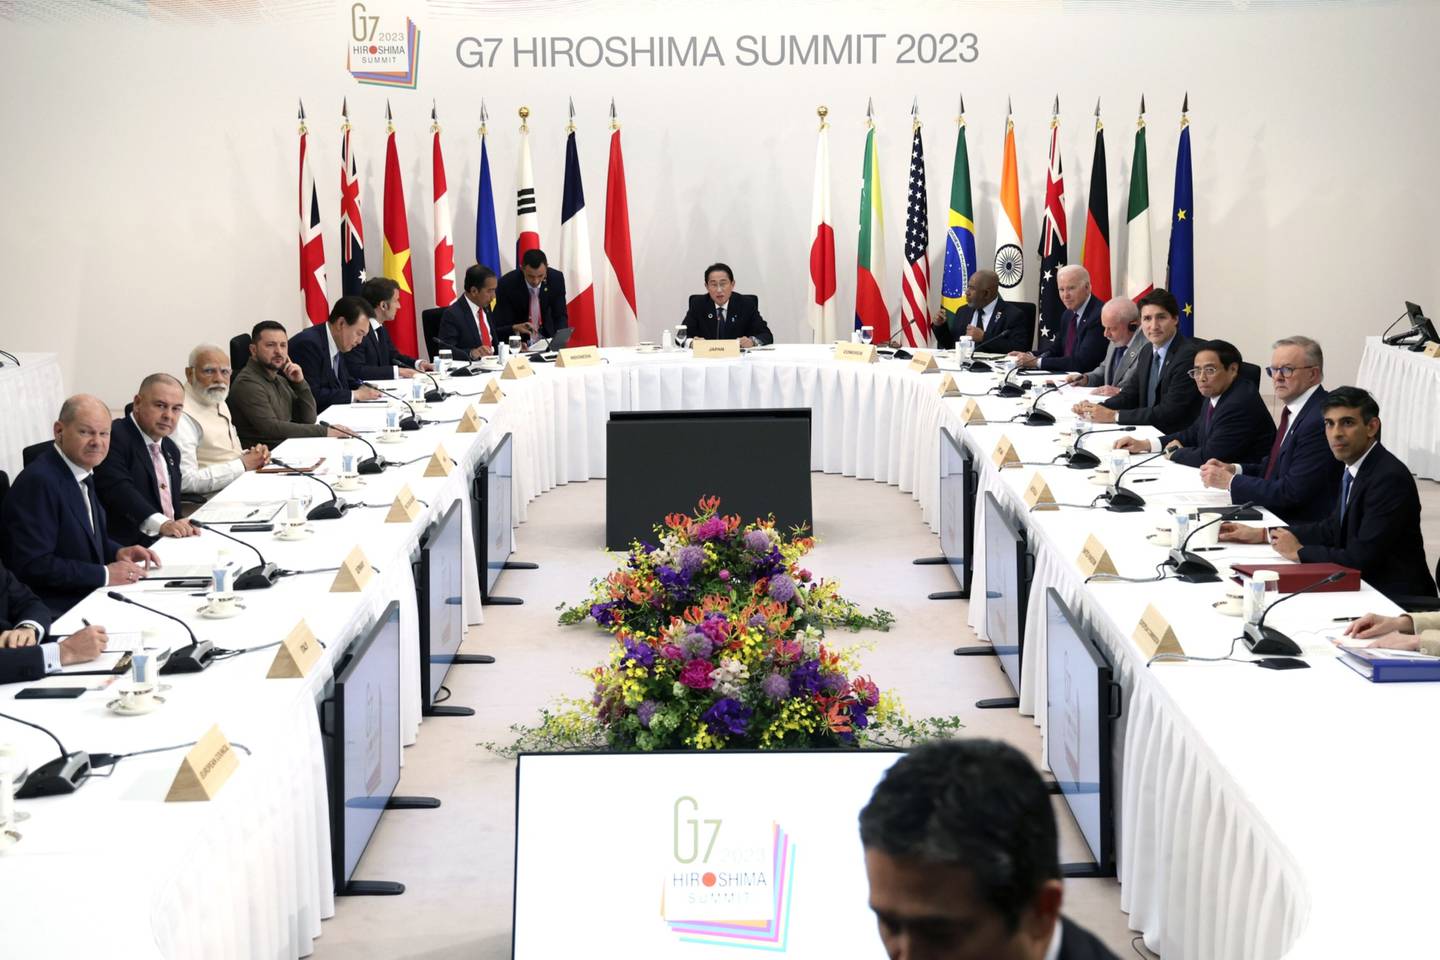 Volodymyr Zelenskiy, Ukraine's president, fourth from left, sits with the Group of Seven (G-7) leaders and outreach countries prior to a session during the G-7 leaders summit in Hiroshima, Japan.